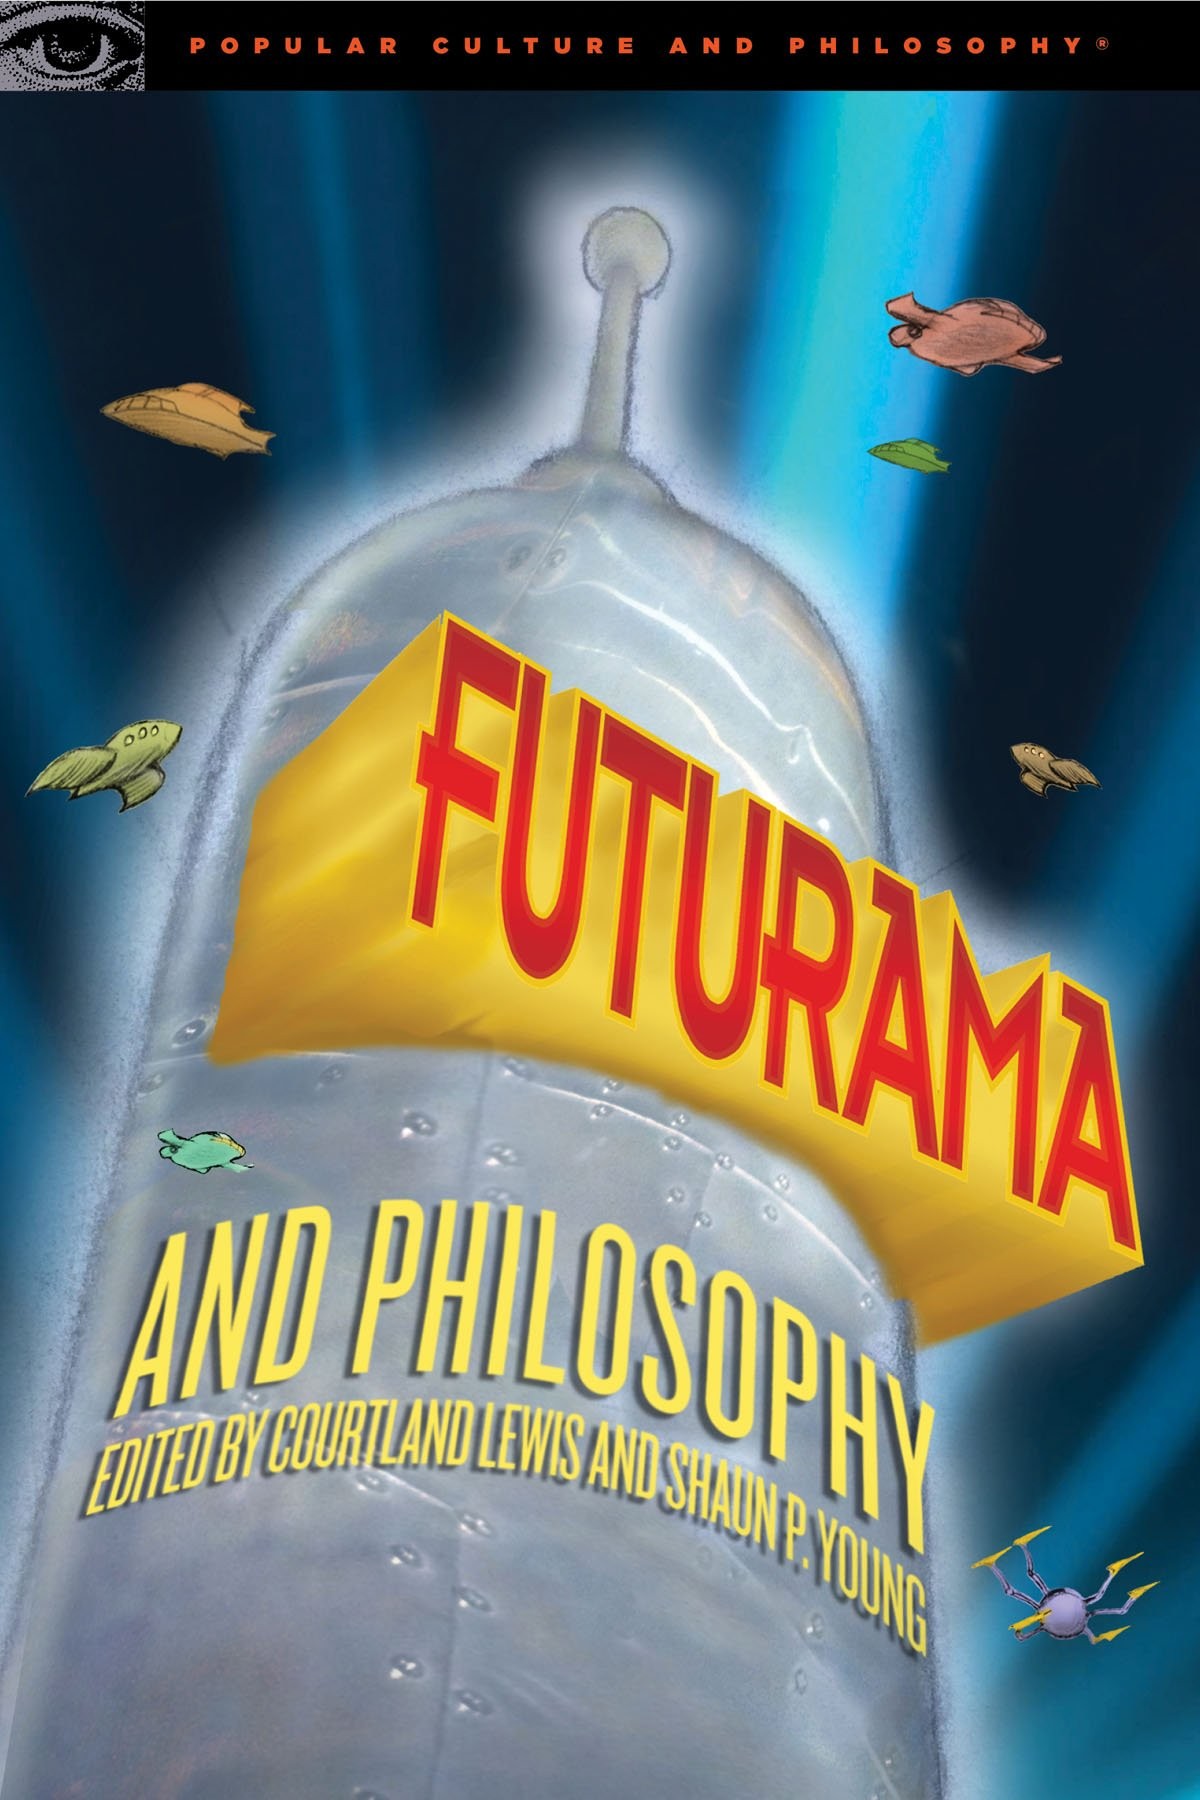 Futurama and Philosophy: Pizza, Paradoxes, And... Good News!